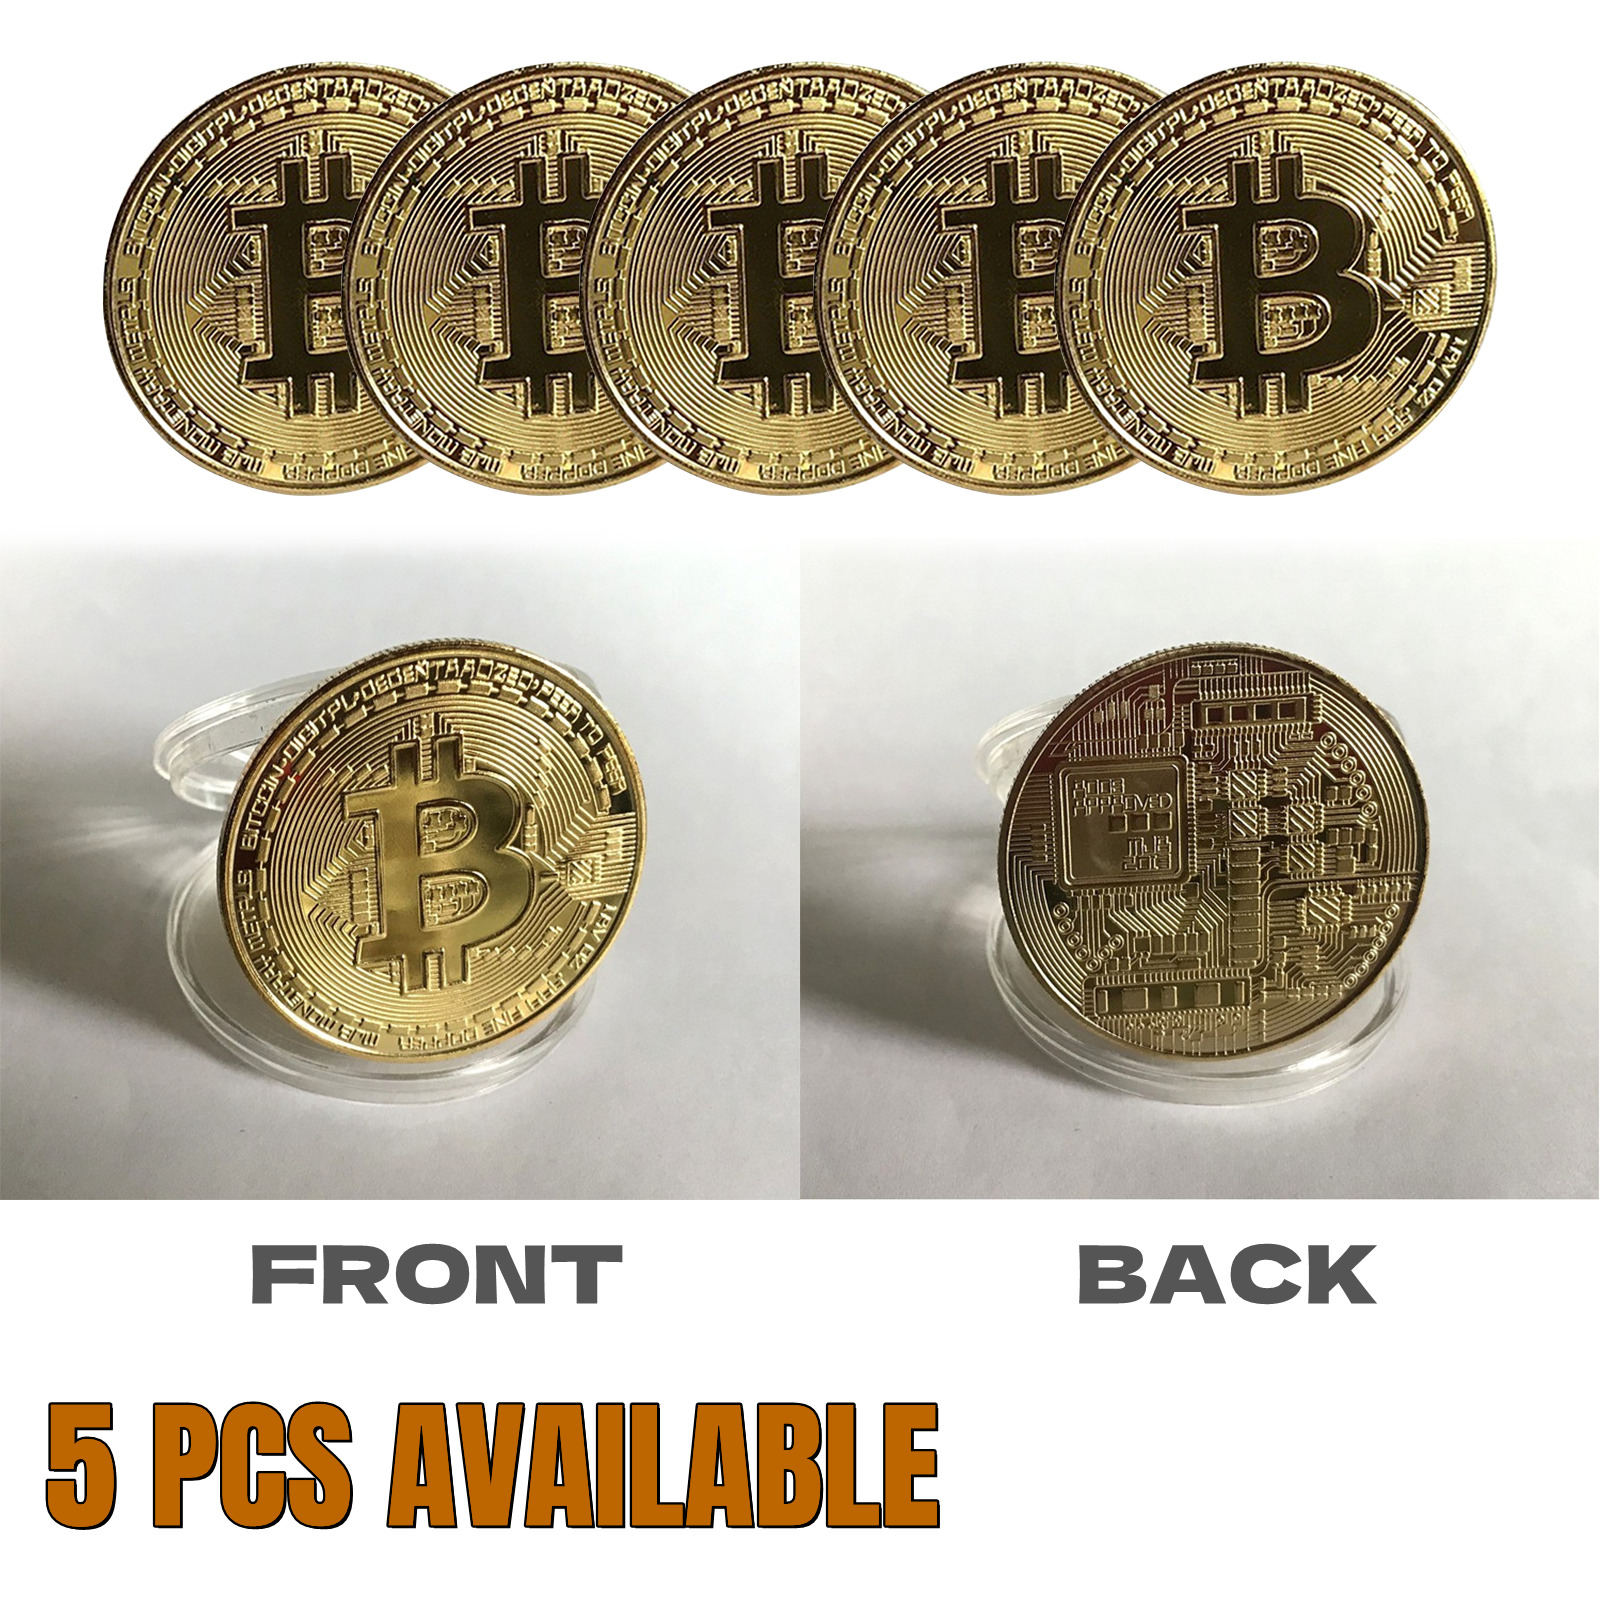 5 Bitcoin Physical Crypto Coin Commemorative Cryptocurrency with Protective Case